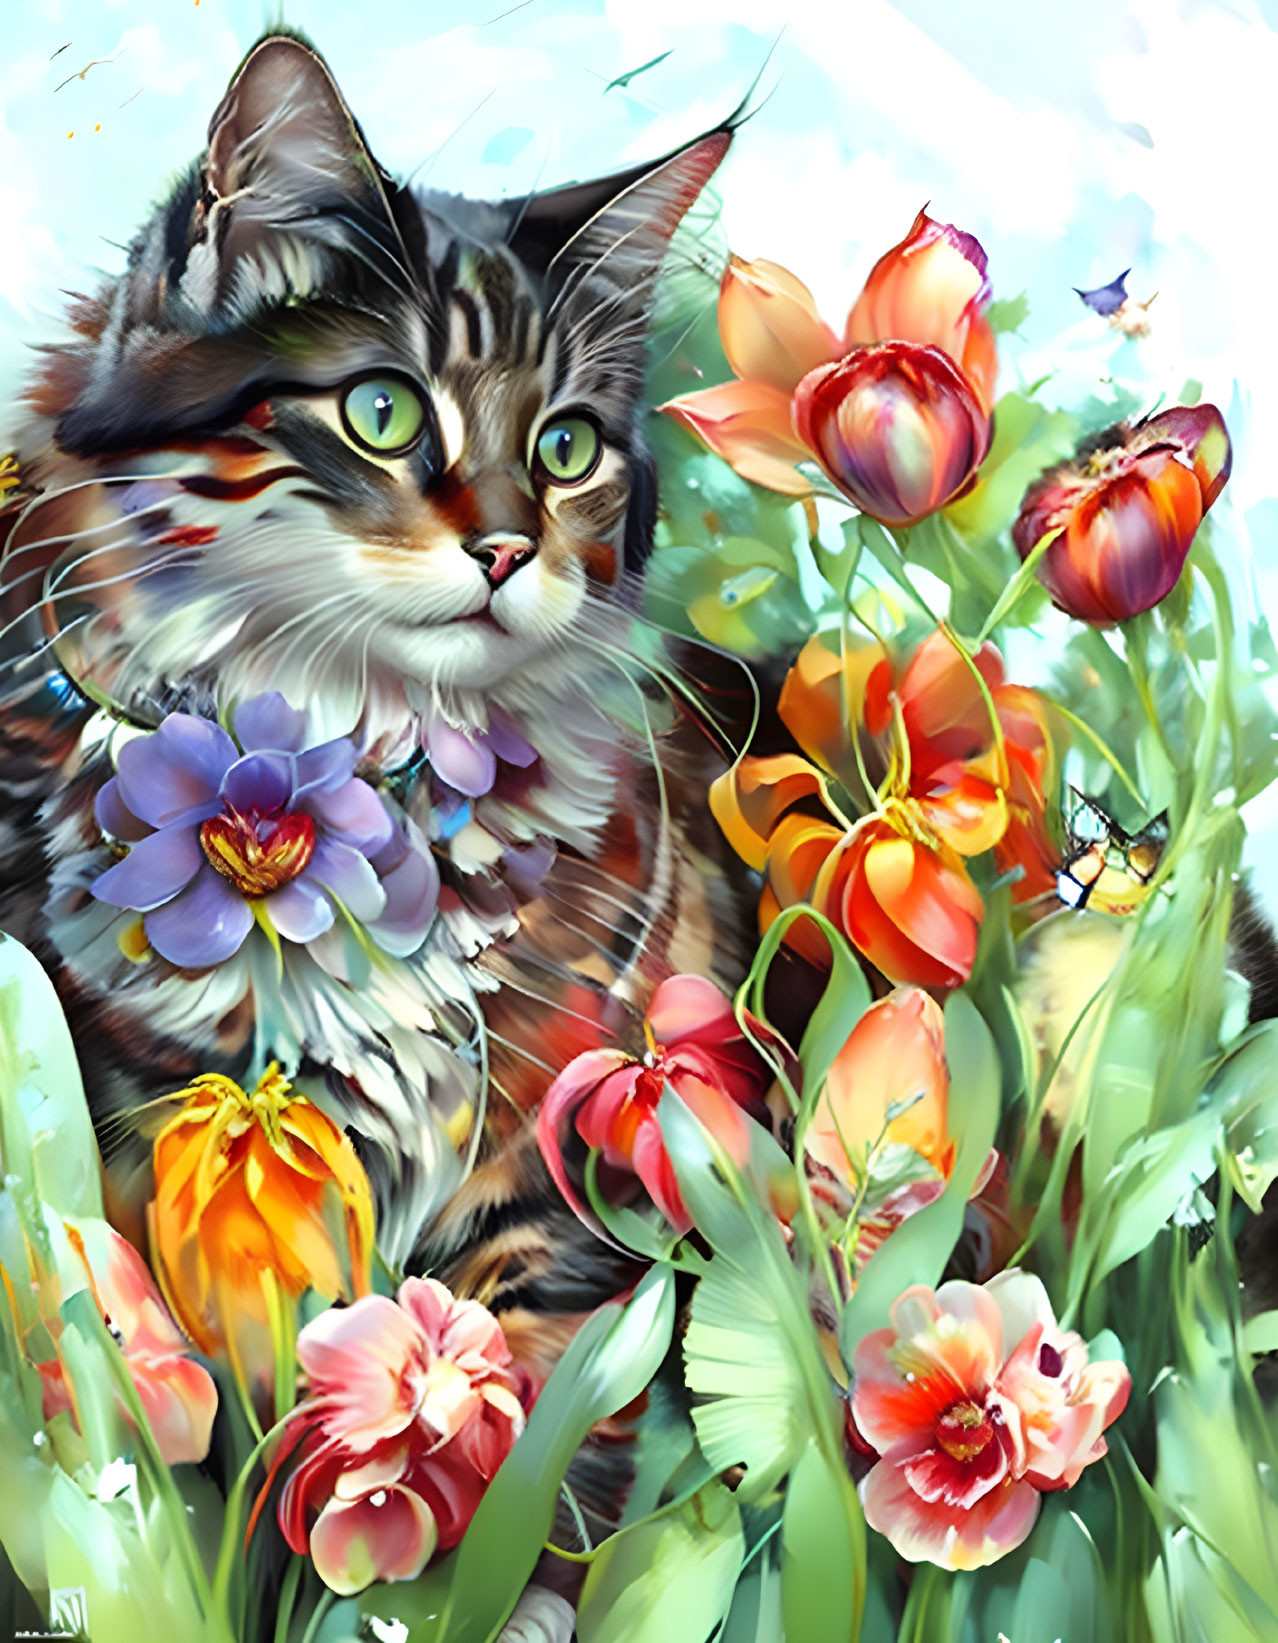 Colorful Cat Illustration Surrounded by Flowers and Butterfly